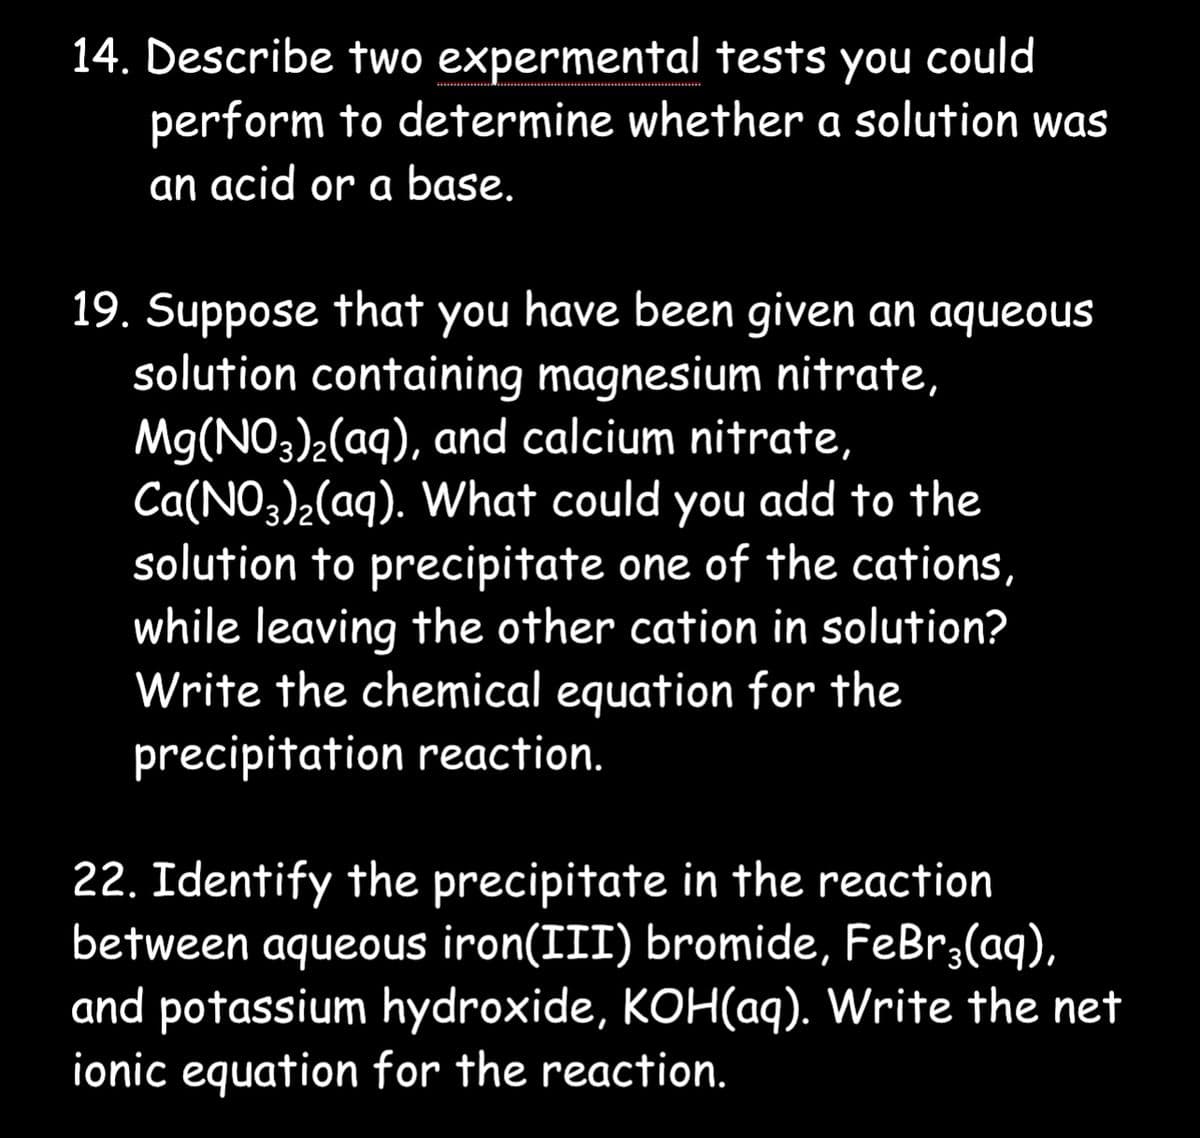 14. Describe two expermental tests you could
perform to determine whether a solution was
an acid or a base.
19. Suppose that you have been given an aqueous
solution containing magnesium nitrate,
Mg(NO3)₂(aq), and calcium nitrate,
Ca(NO3)₂(aq). What could you add to the
solution to precipitate one of the cations,
while leaving the other cation in solution?
Write the chemical equation for the
precipitation reaction.
22. Identify the precipitate in the reaction
between aqueous iron(III) bromide, FeBr3(aq),
and potassium hydroxide, KOH(aq). Write the net
ionic equation for the reaction.